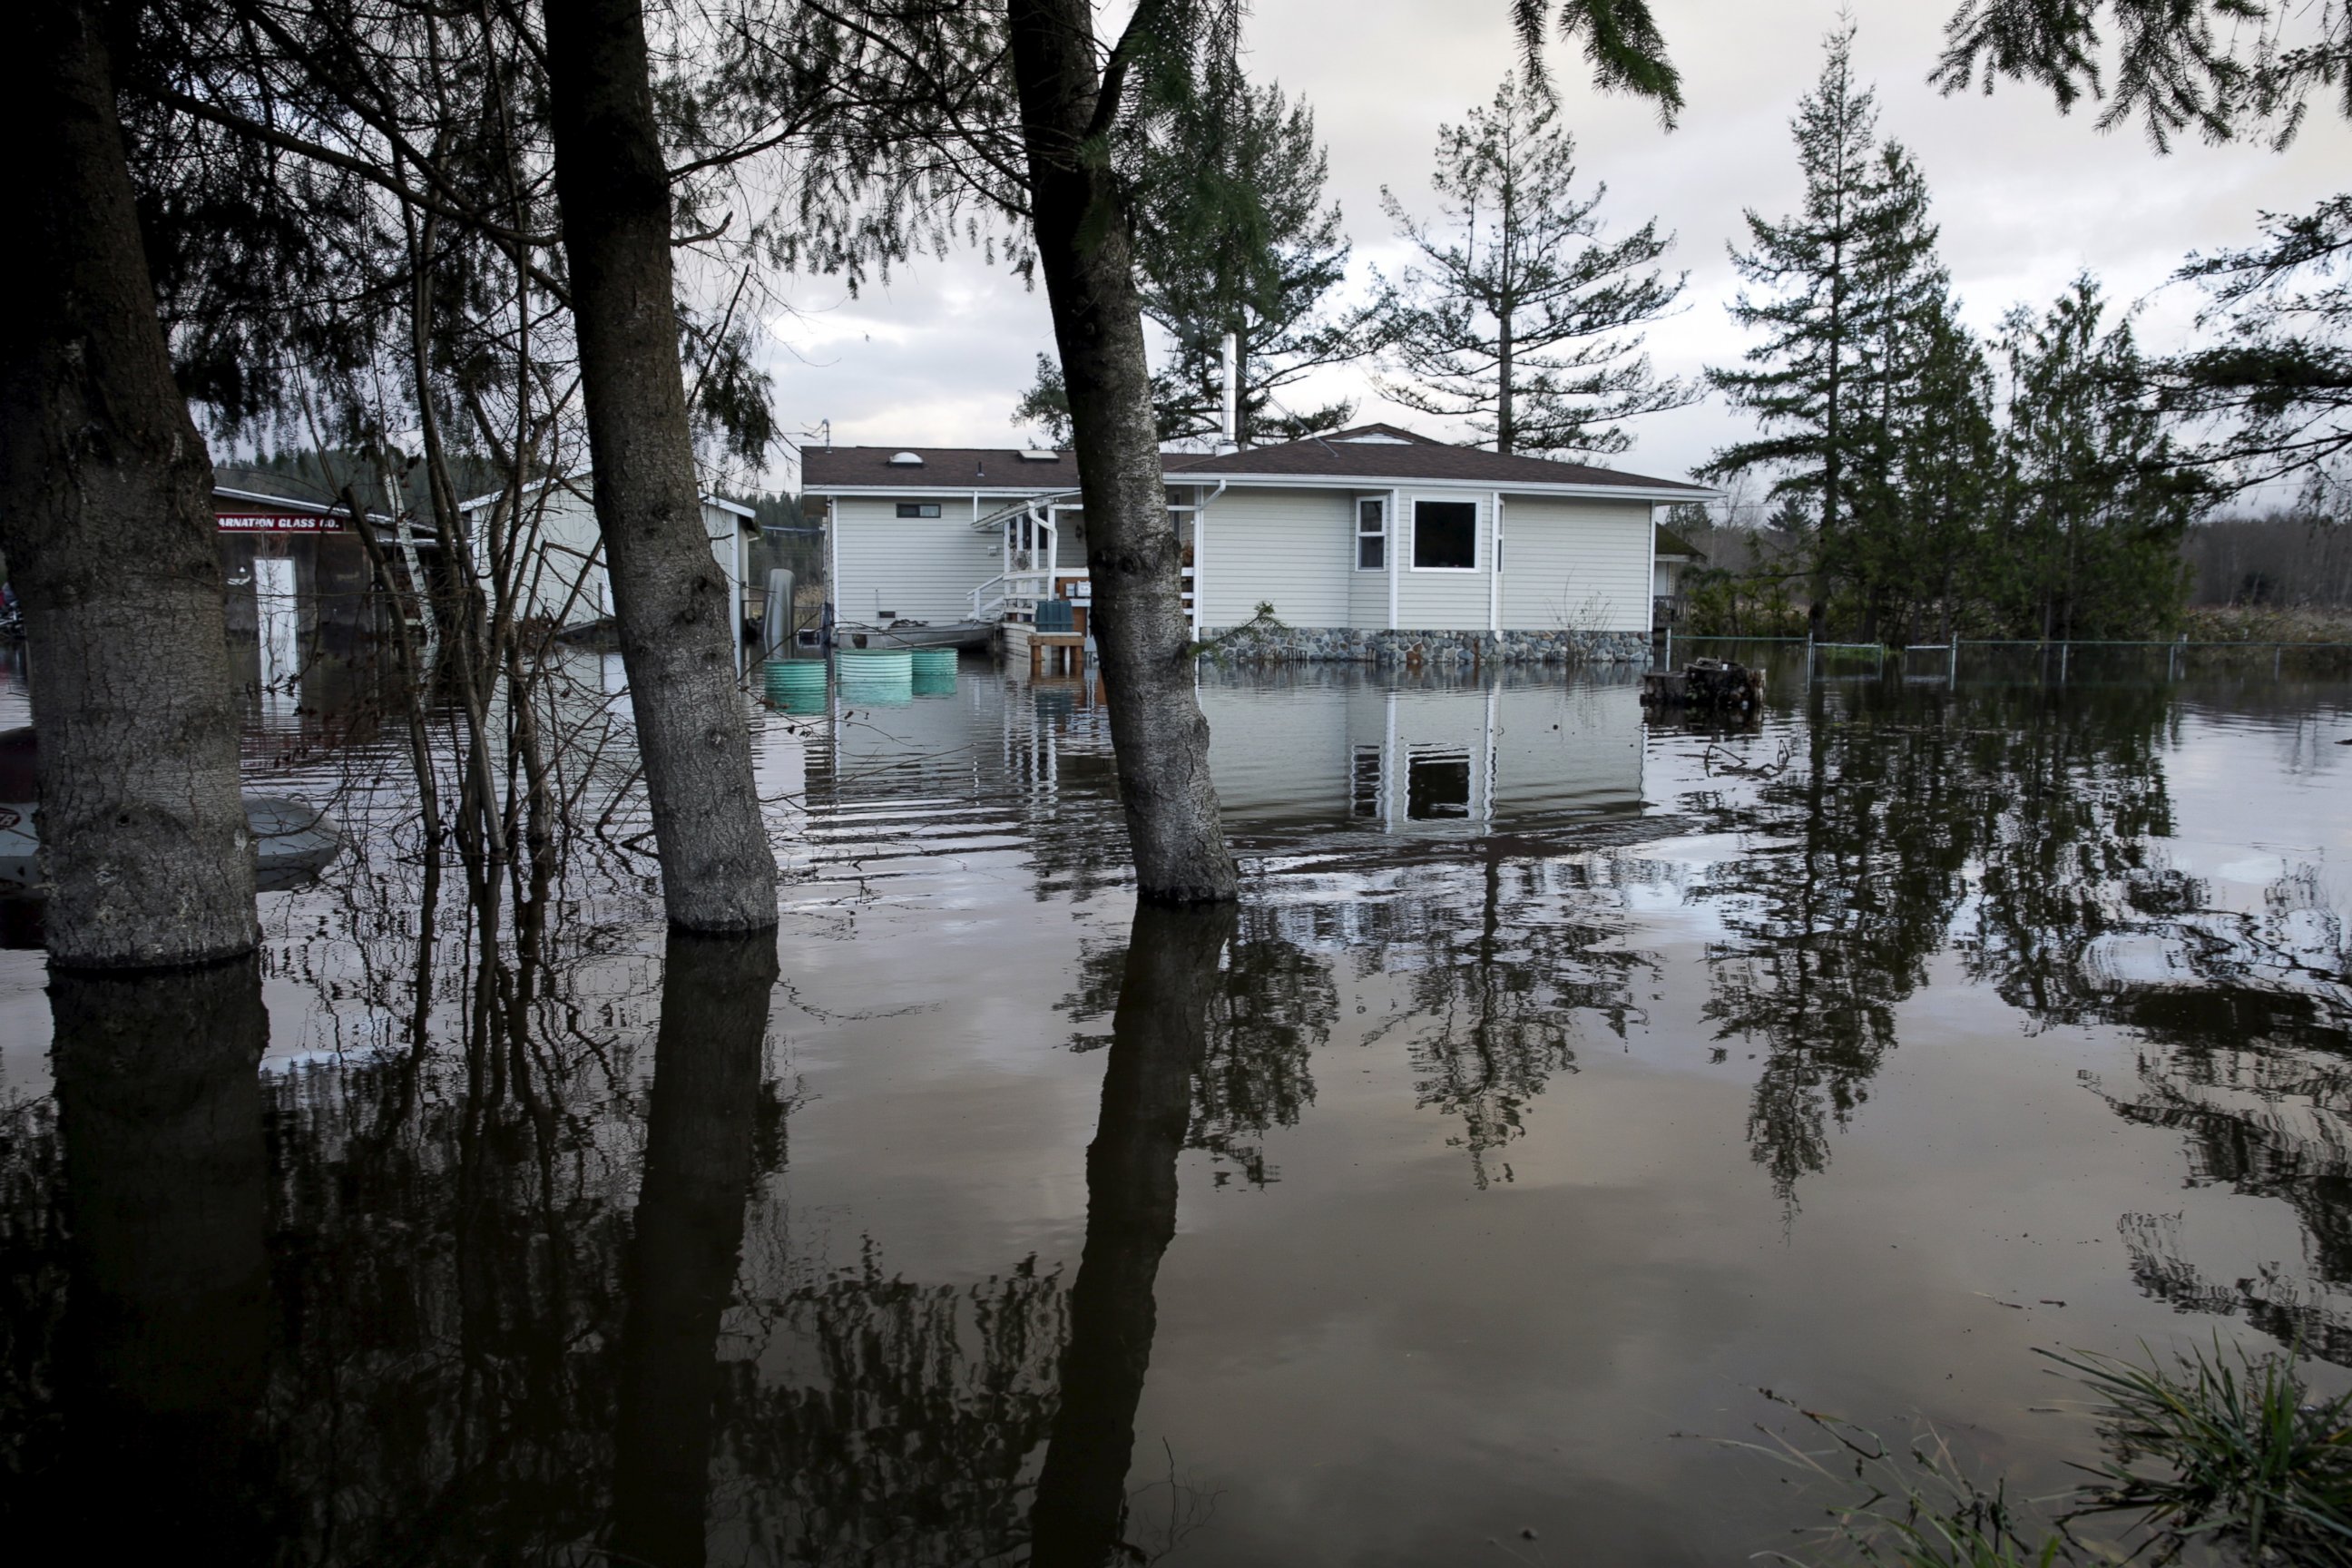 PHOTO:Flood waters of the Snoqualmie River surround a residence off State Route 203 during a storm in Carnation, Wash., Dec. 9, 2015.  